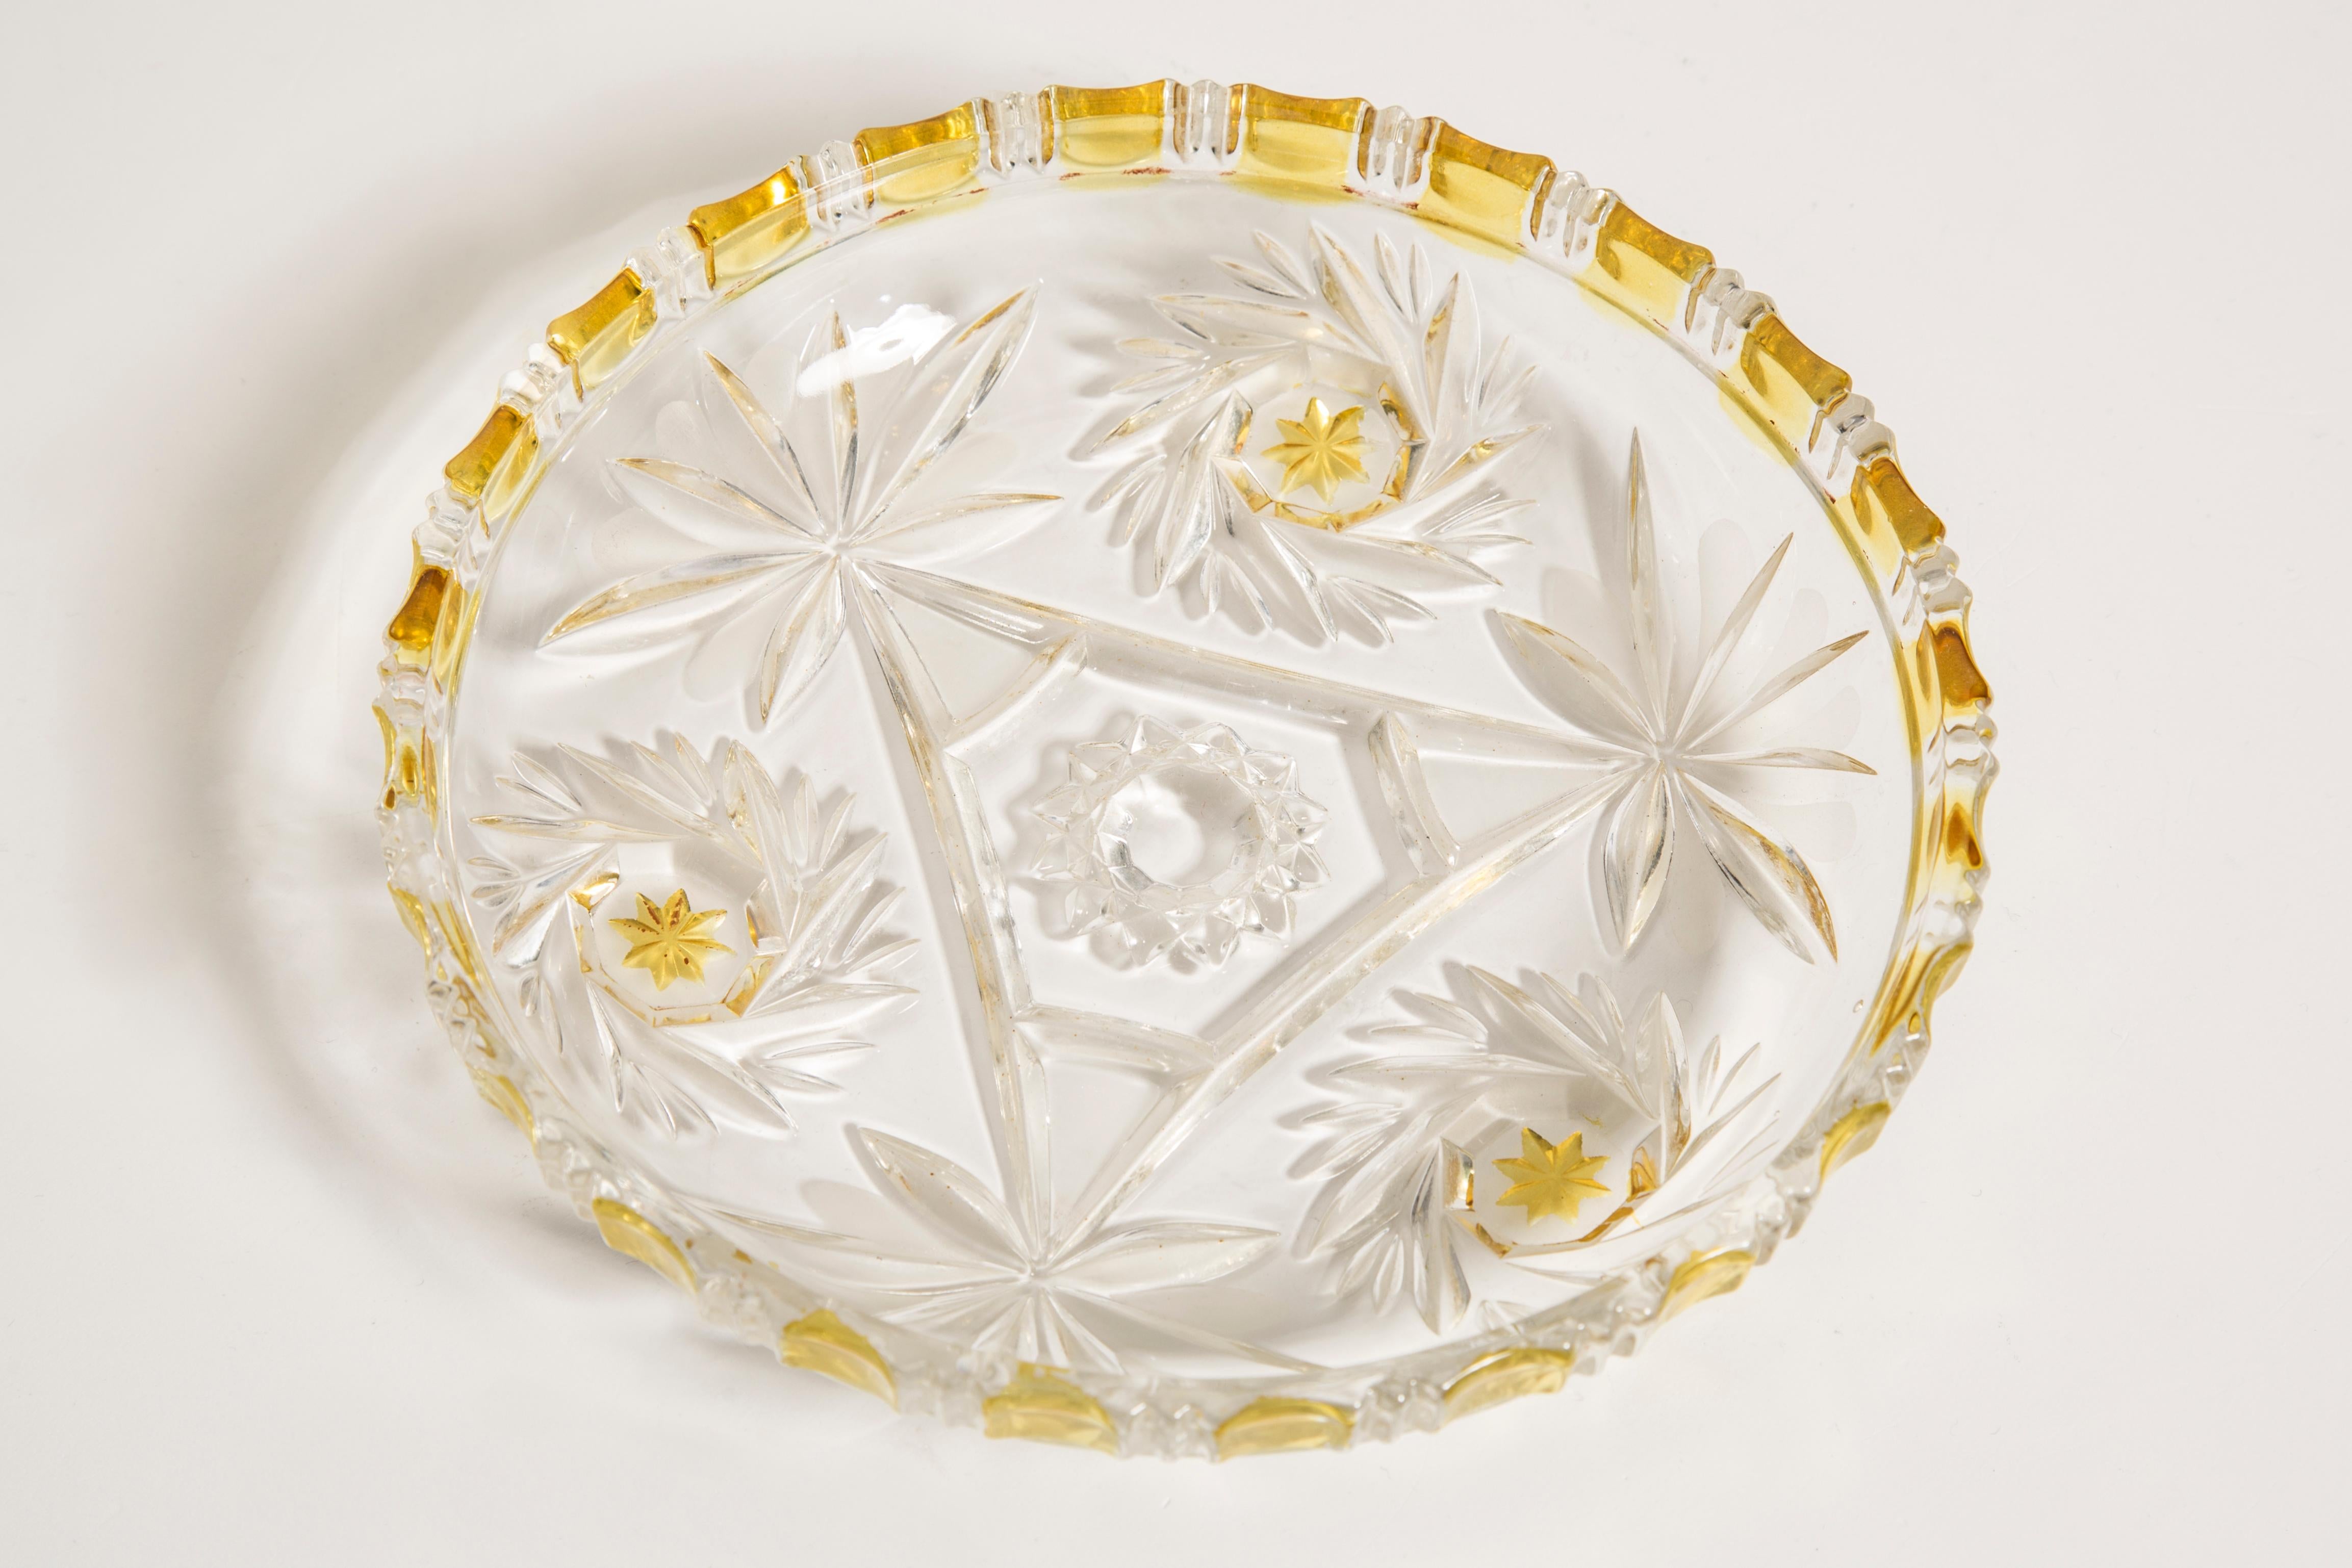 Vintage Transparent and Yellow Decorative Glass Plate, Italy, 1960s For Sale 1